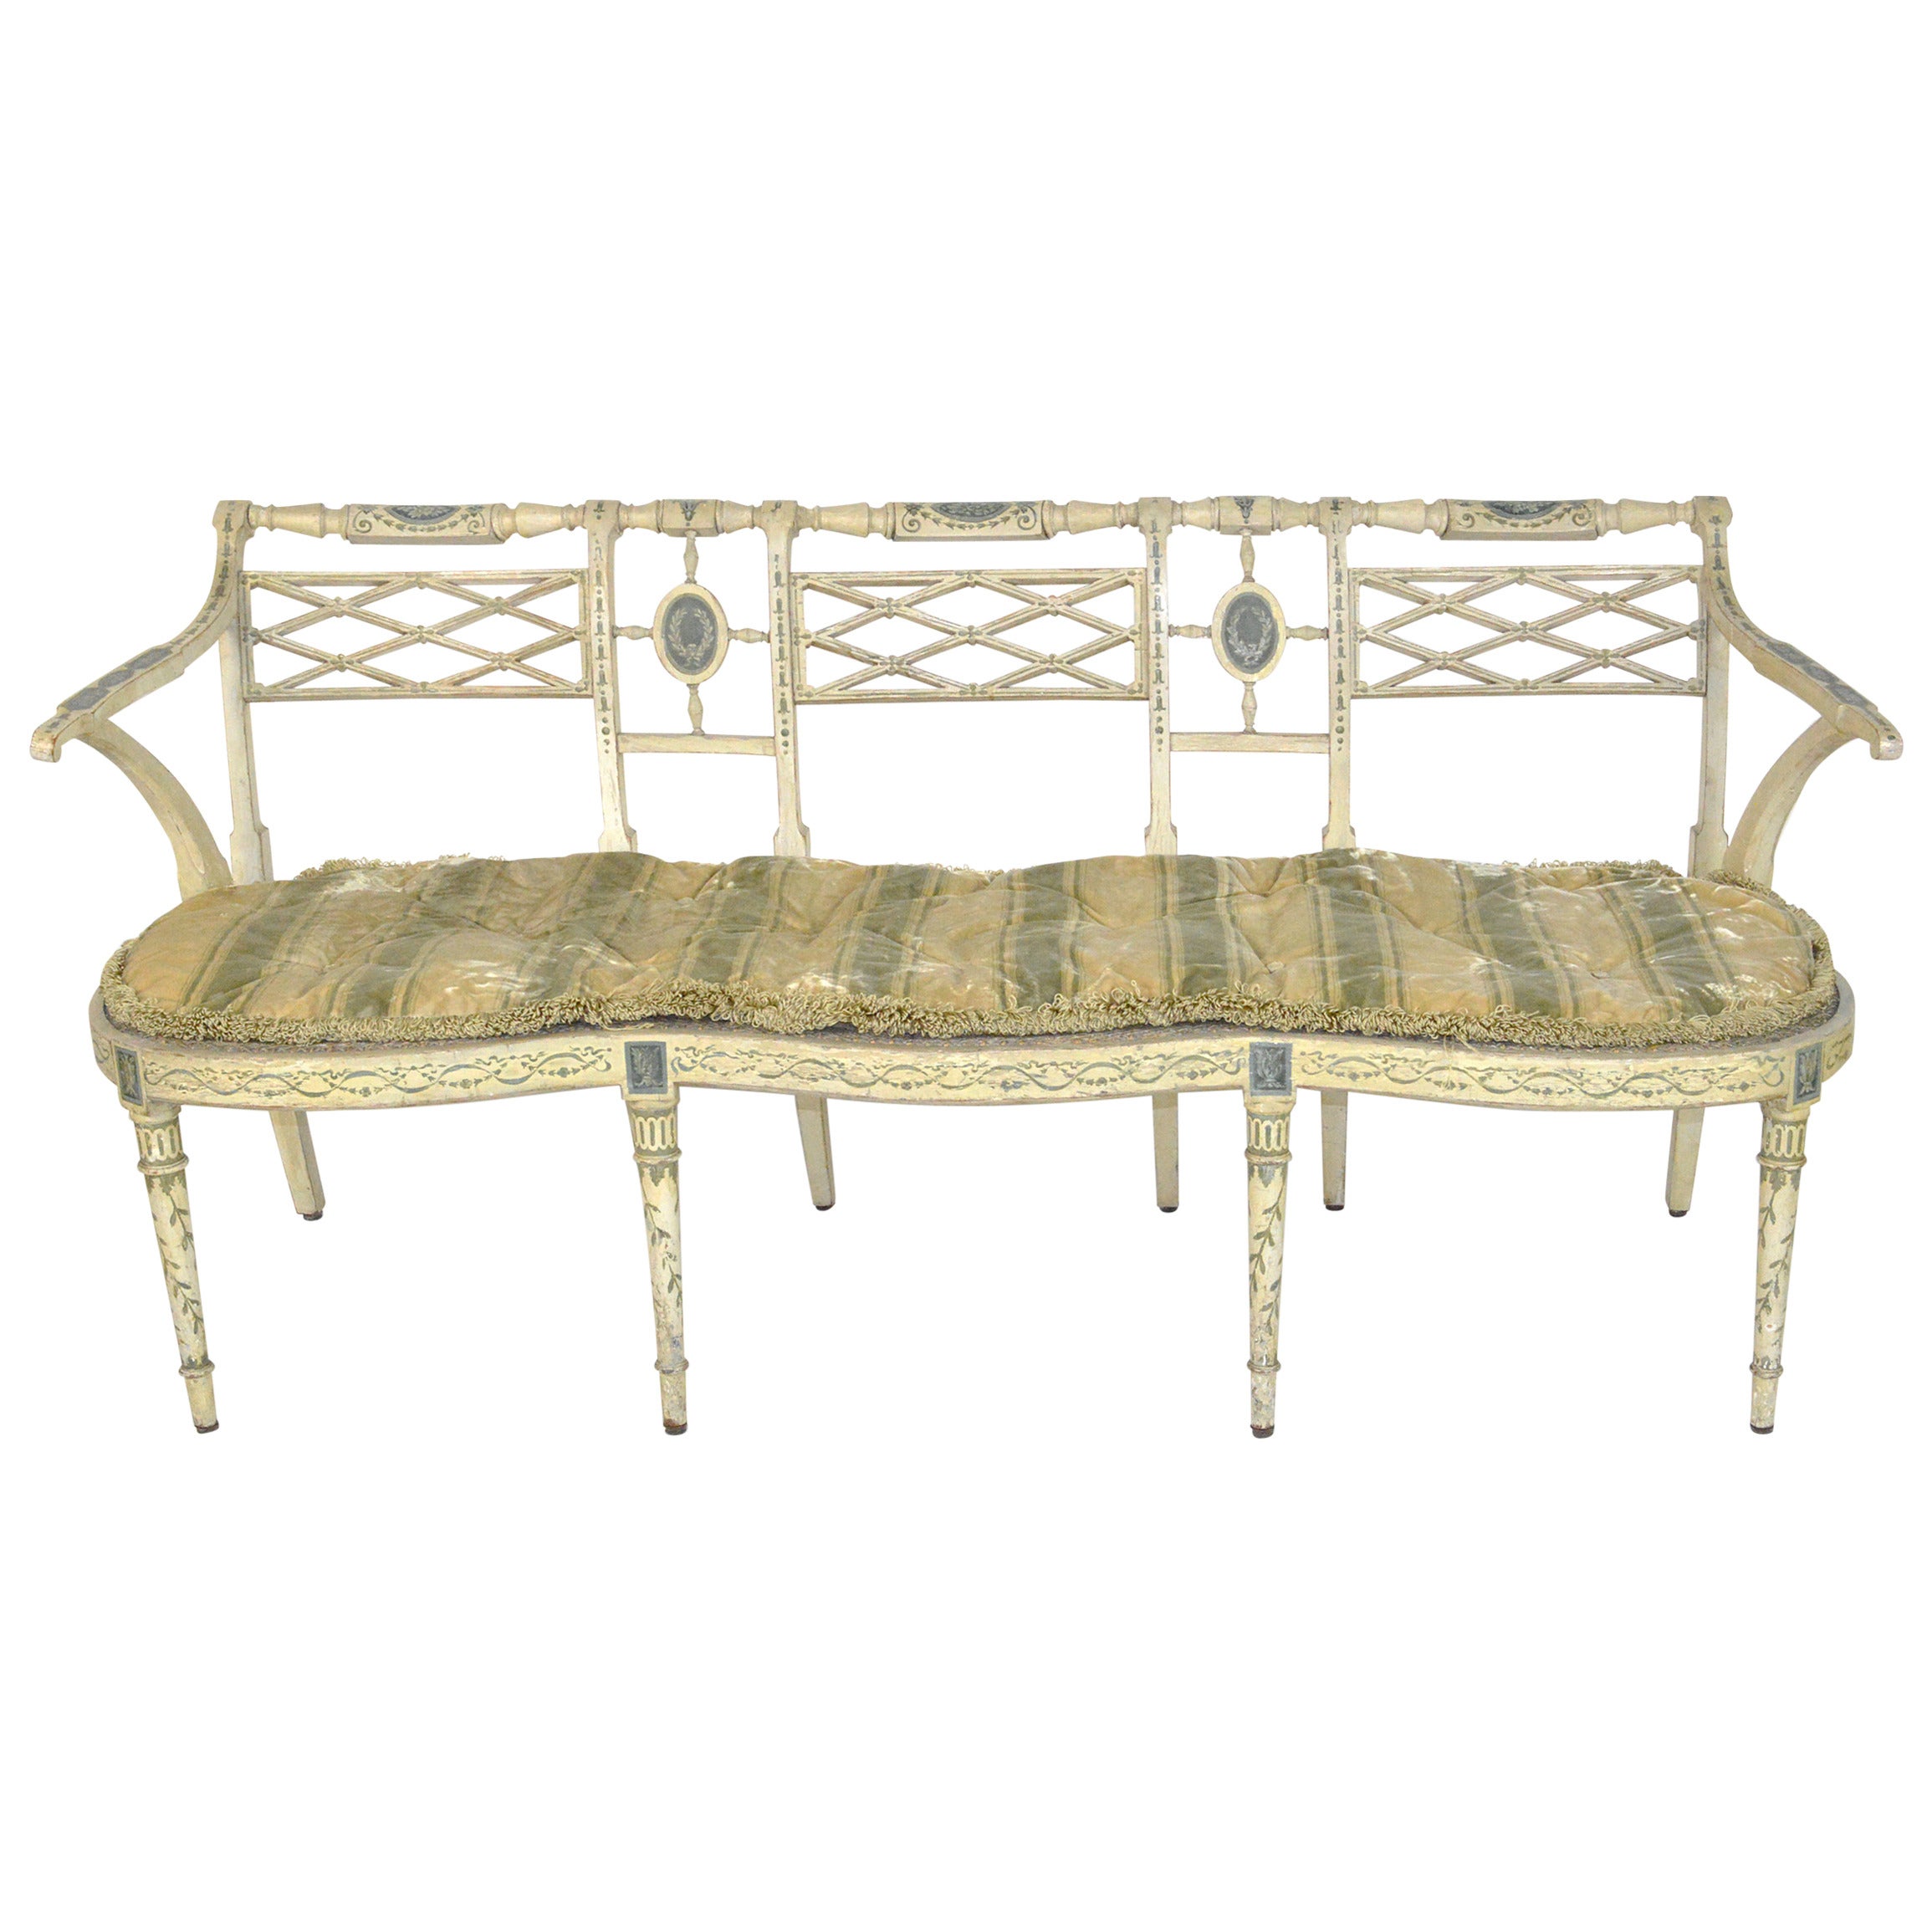 Neoclassical Style Three-Seat Painted Settee, 19th Century For Sale